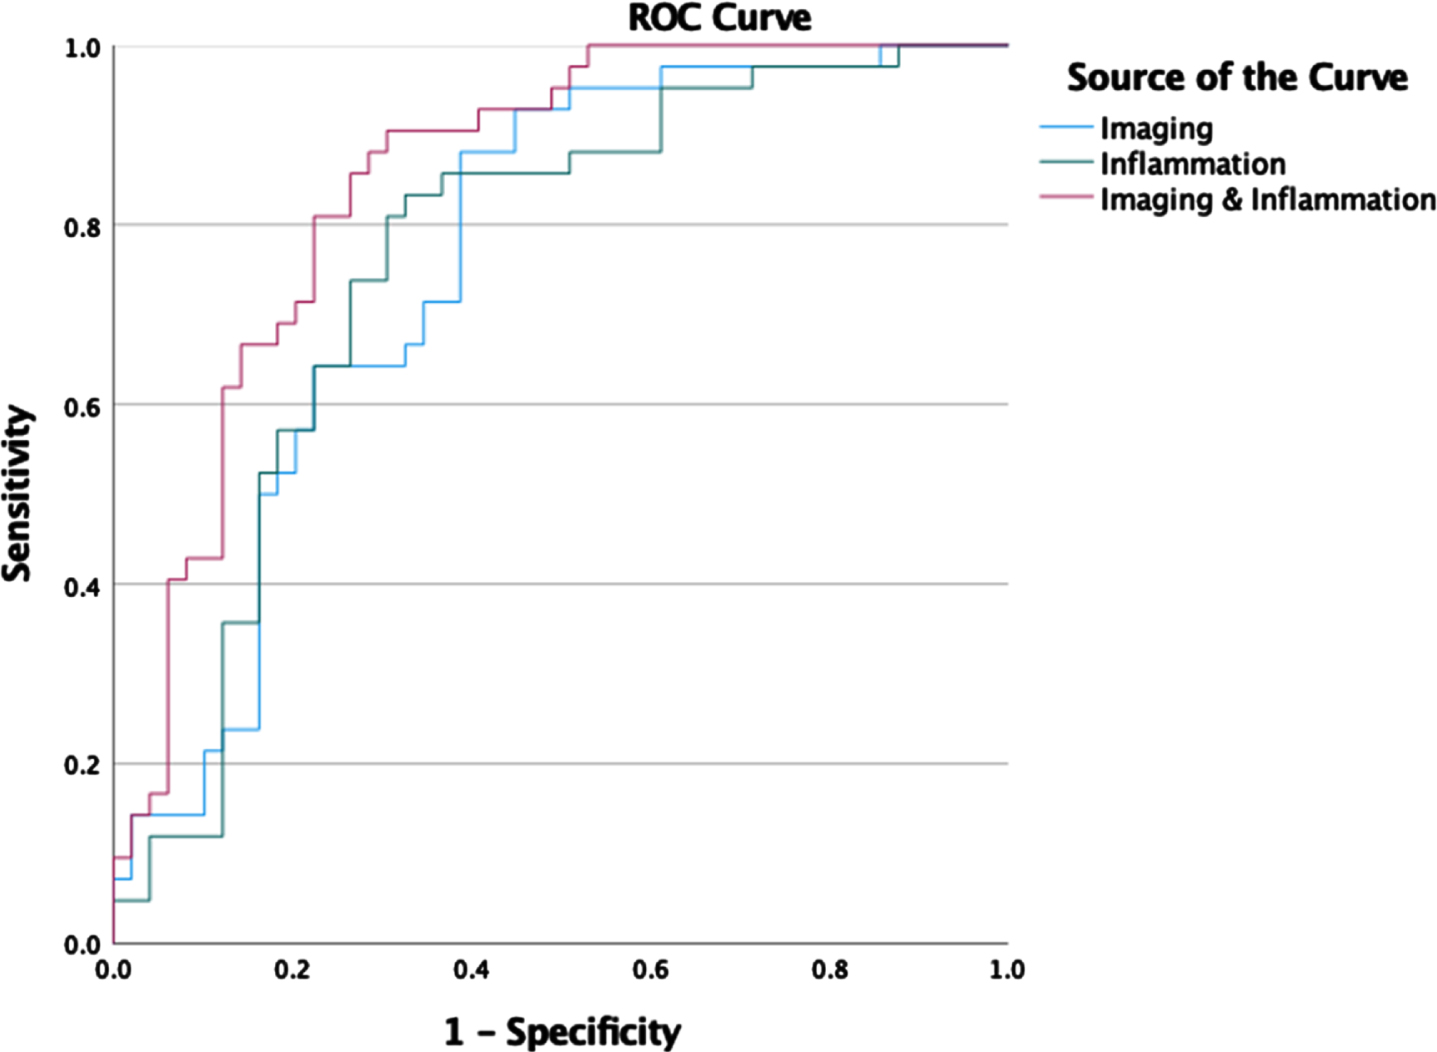 ROC Curves for logistic regression classification of high versus low likelihood of AD using imaging, inflammation, and combined markers (Precuneus, MTL, ADA).